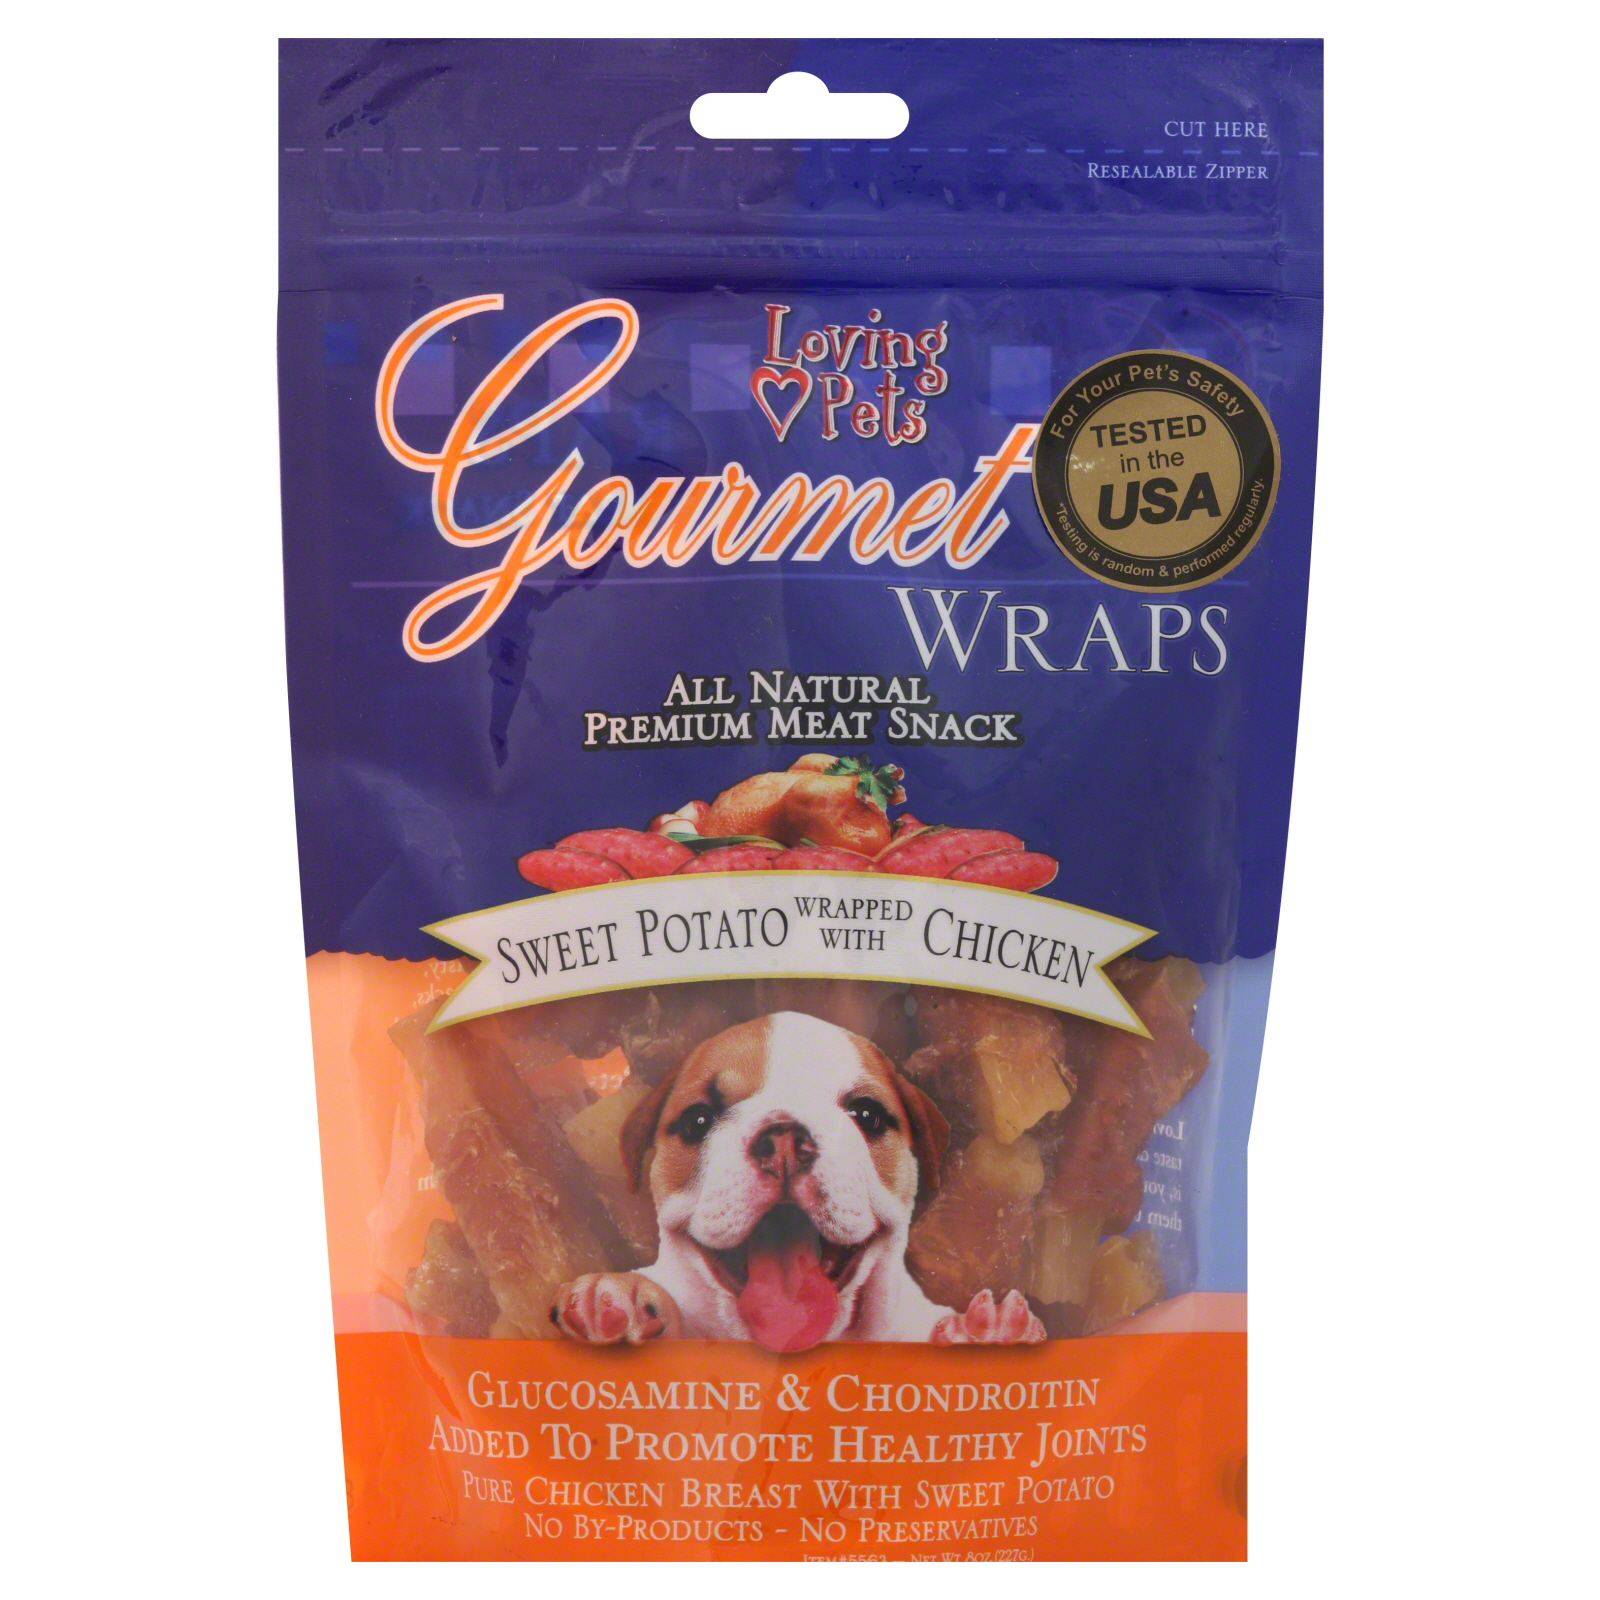 Loving Pets Gourmet All Natural Premium Meat Snack, Wraps, Sweet Potato Wrapped with Chicken, 8 oz (227 g)